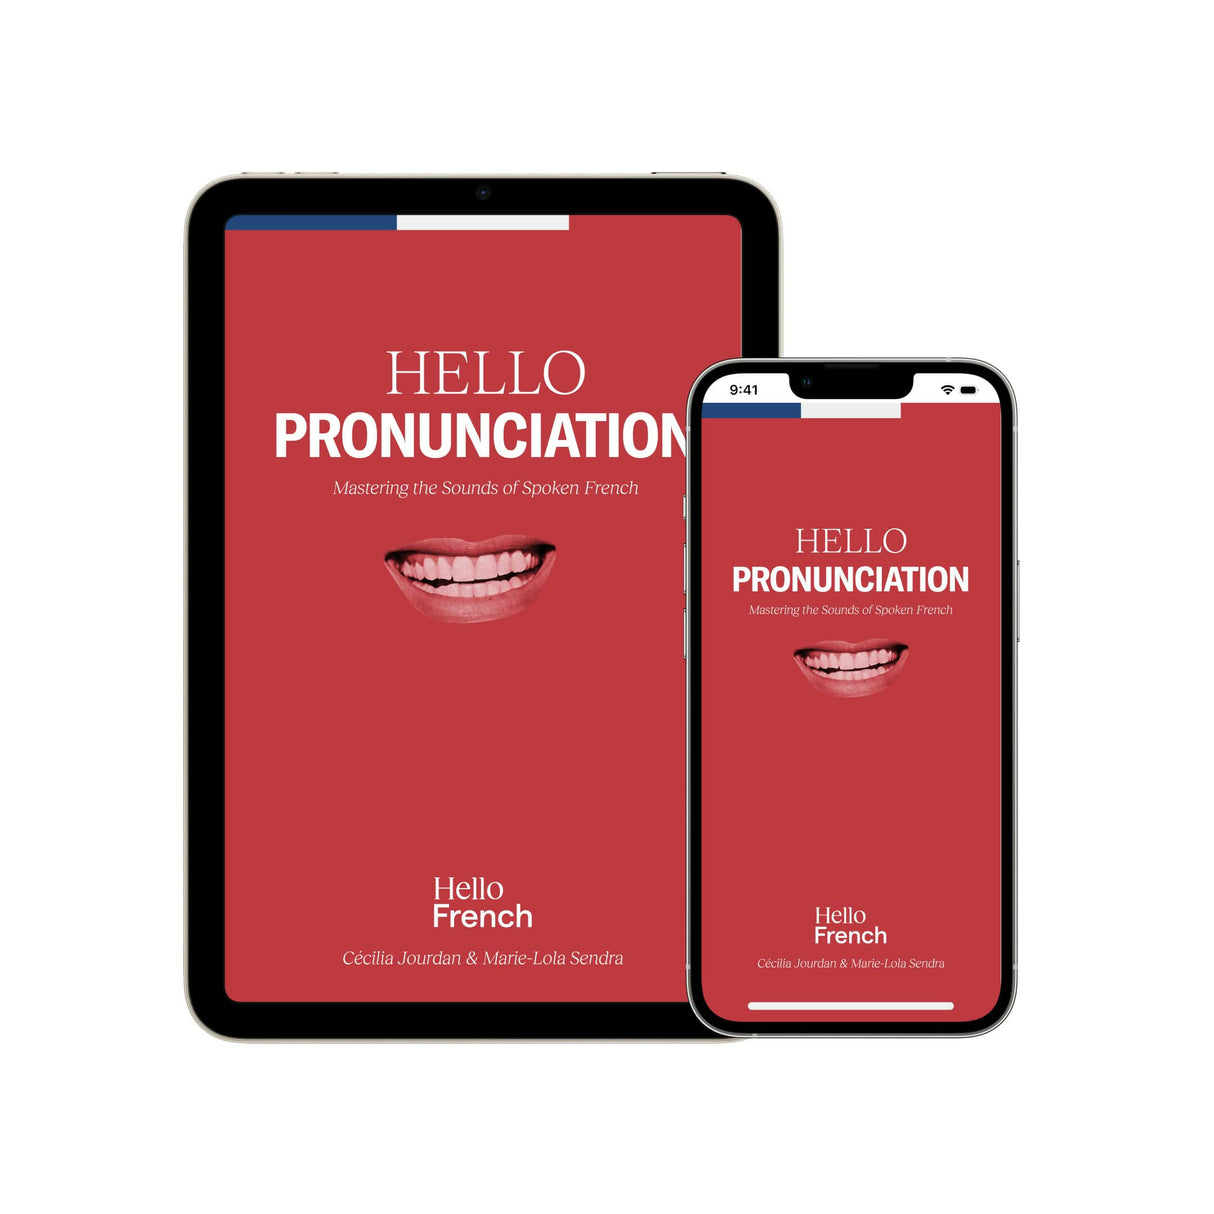 Hello Pronunciation: Mastering the Sounds of Spoken French